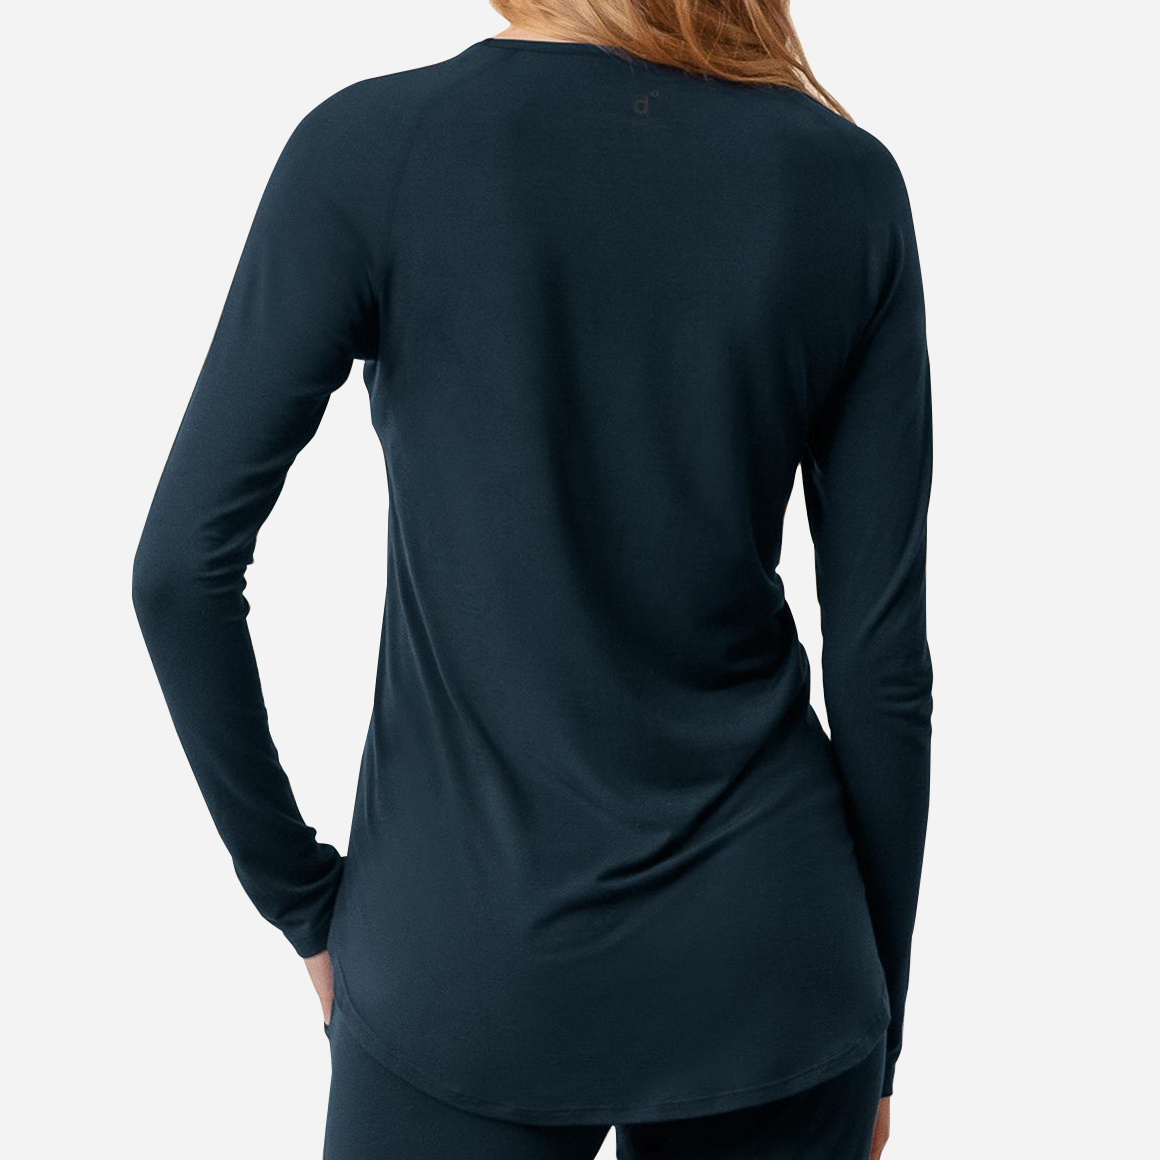 Designed with your comfort in mind, this sleep shirt features a cozy 4-way stretch that feels soft and lightweight against your skin. The flattering drape and extended back hem provides extra coverage.